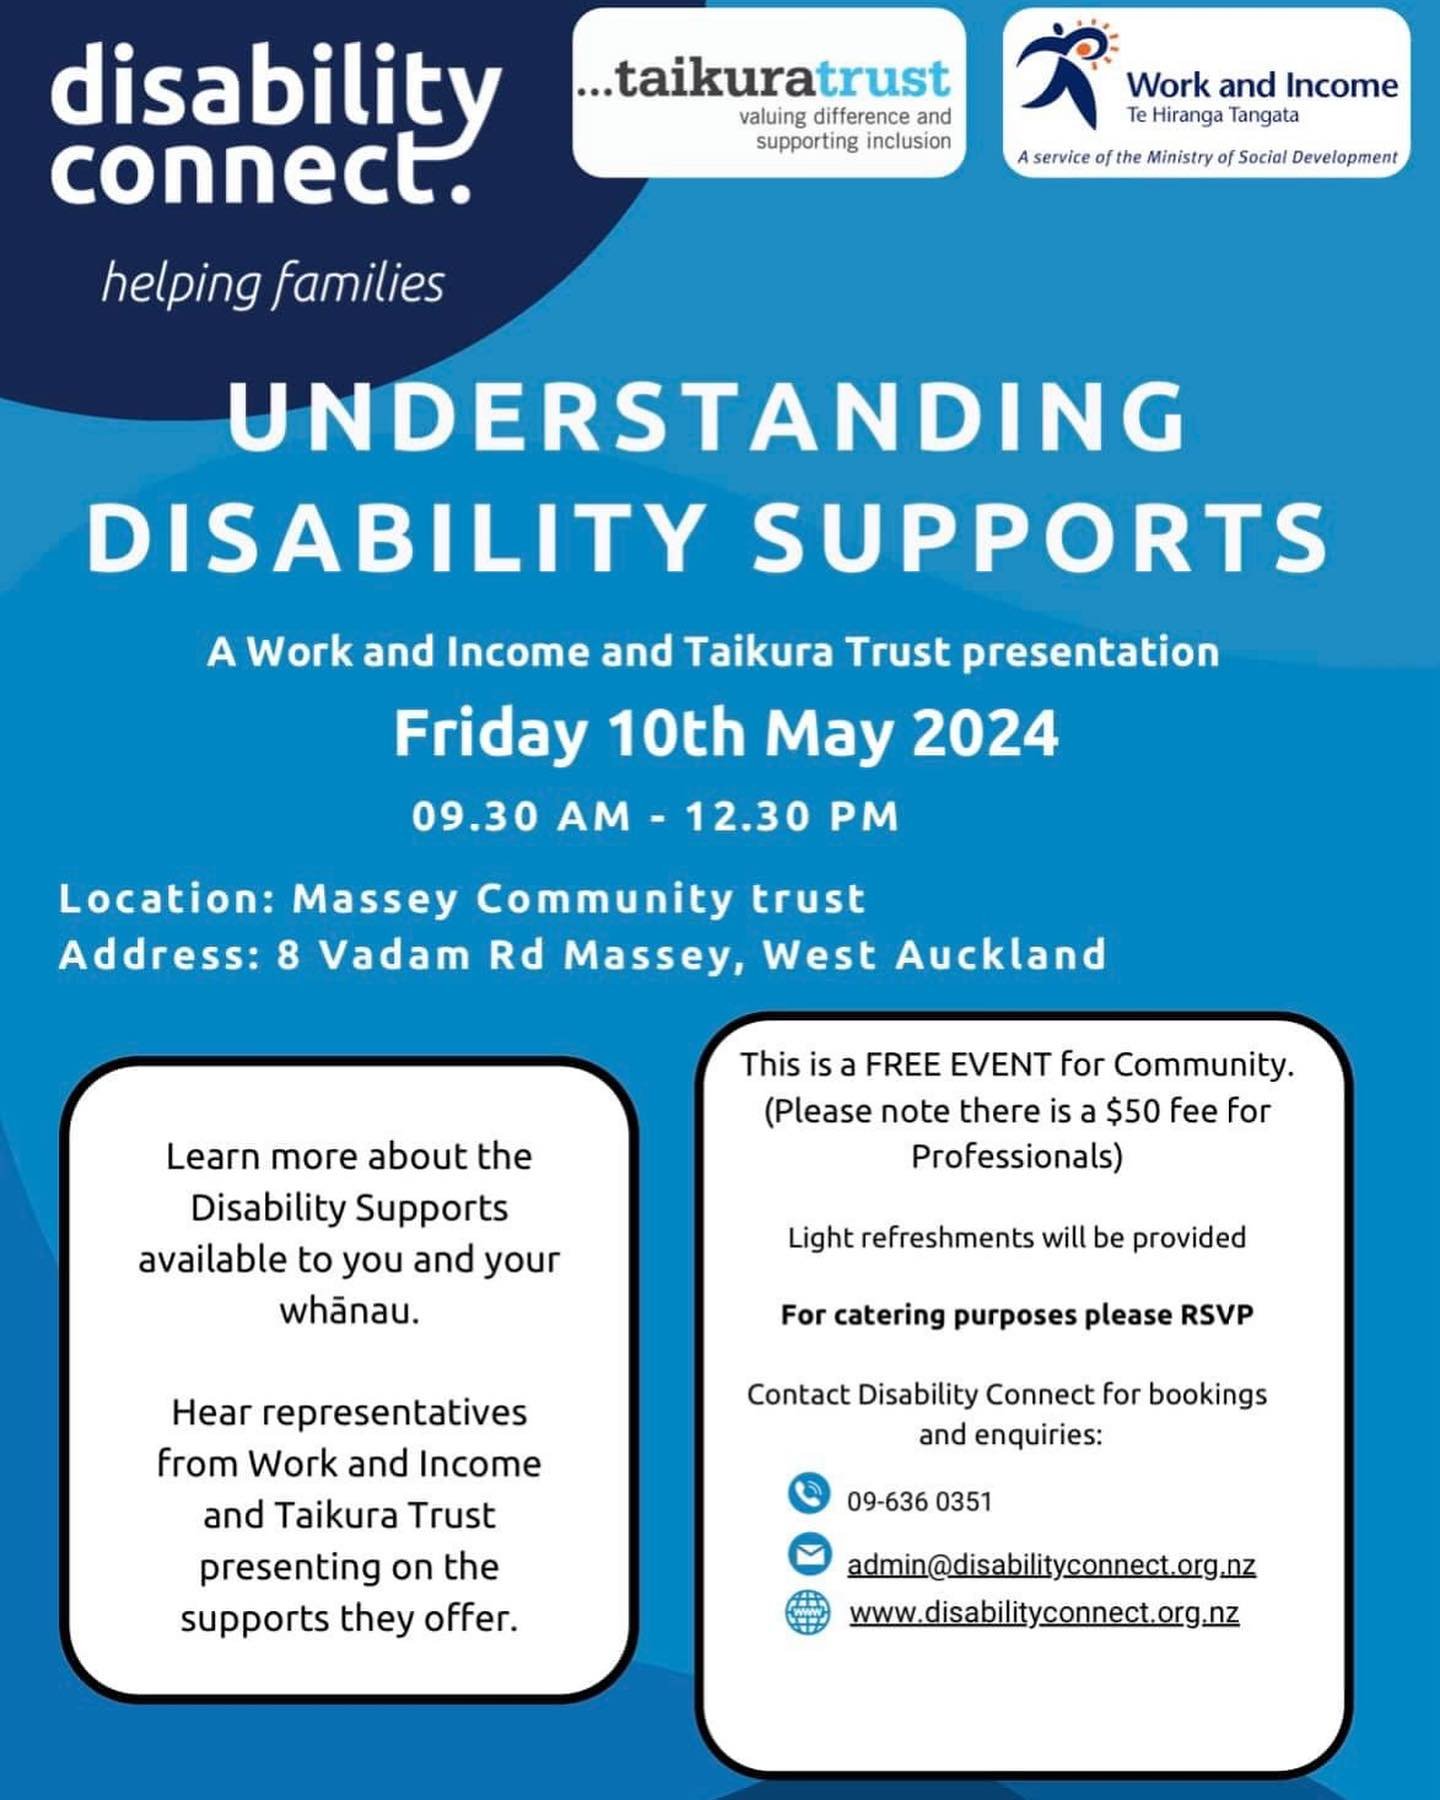 Make sure you RSVP by emailing admin@disabilityconnect.org.nz 

This is a great opportunity to learn more about the disability supports available to you, your whānau or someone you support. 

See you Friday! :) 

@Disability Connect @Taikura Trust